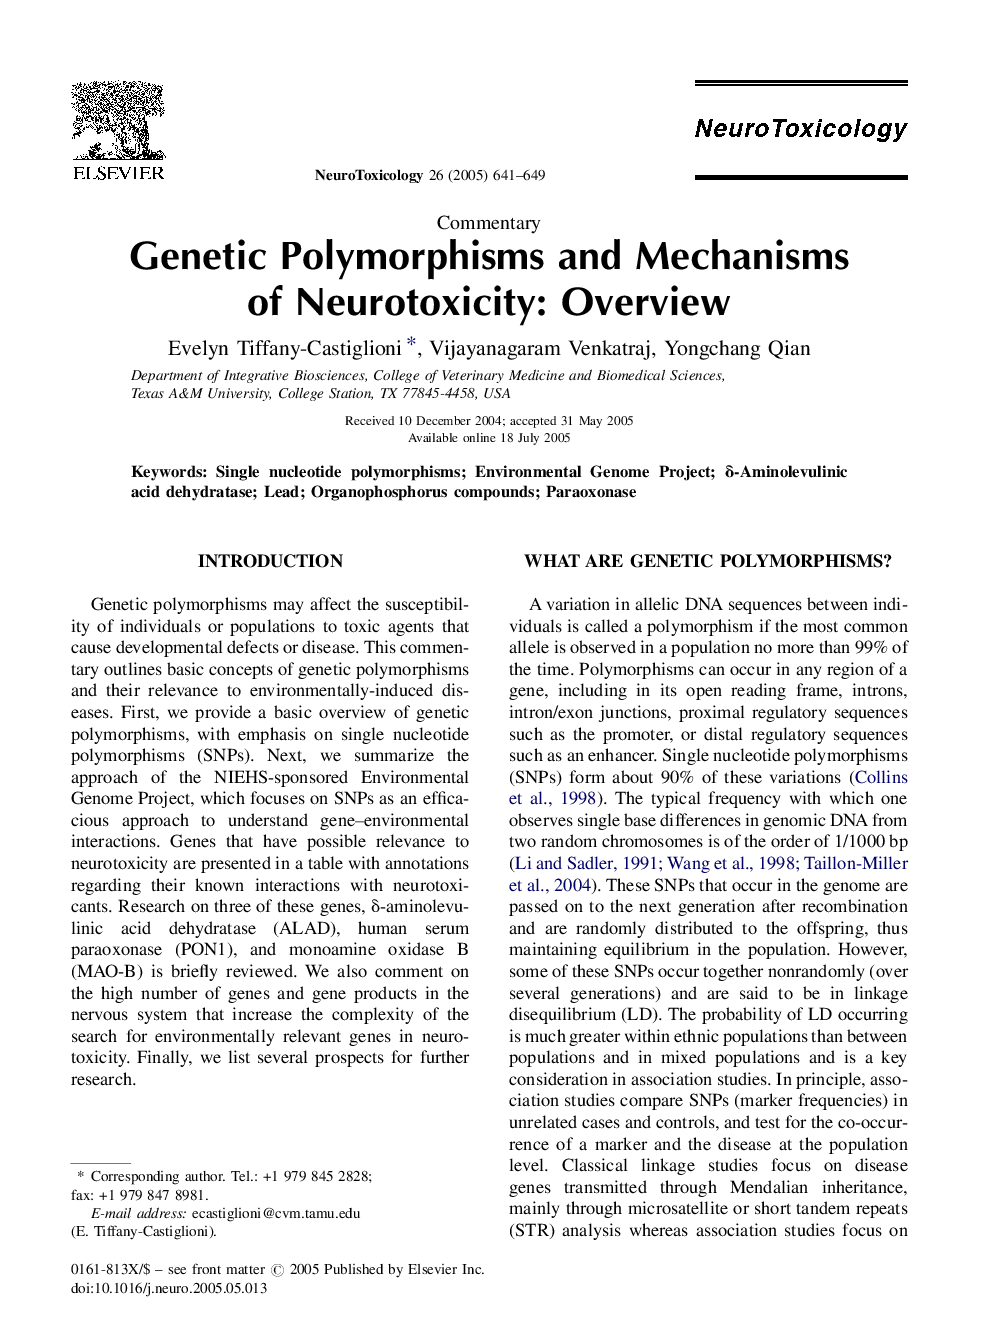 Genetic Polymorphisms and Mechanisms of Neurotoxicity: Overview